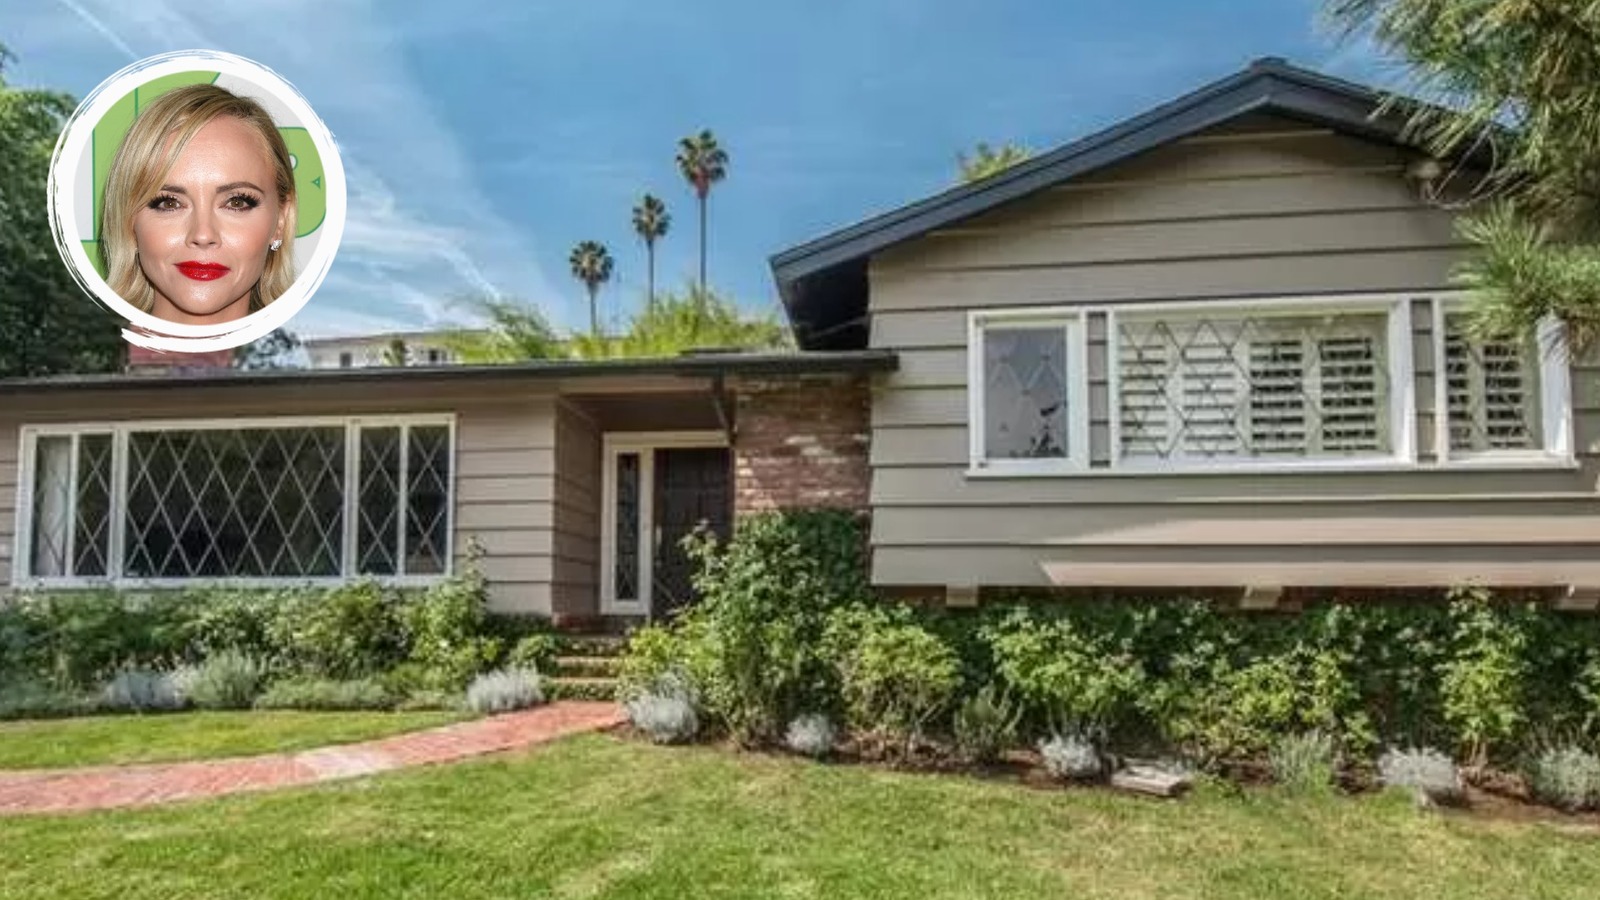 Christina Ricci Used To Live In An Unexpectedly Modest Home